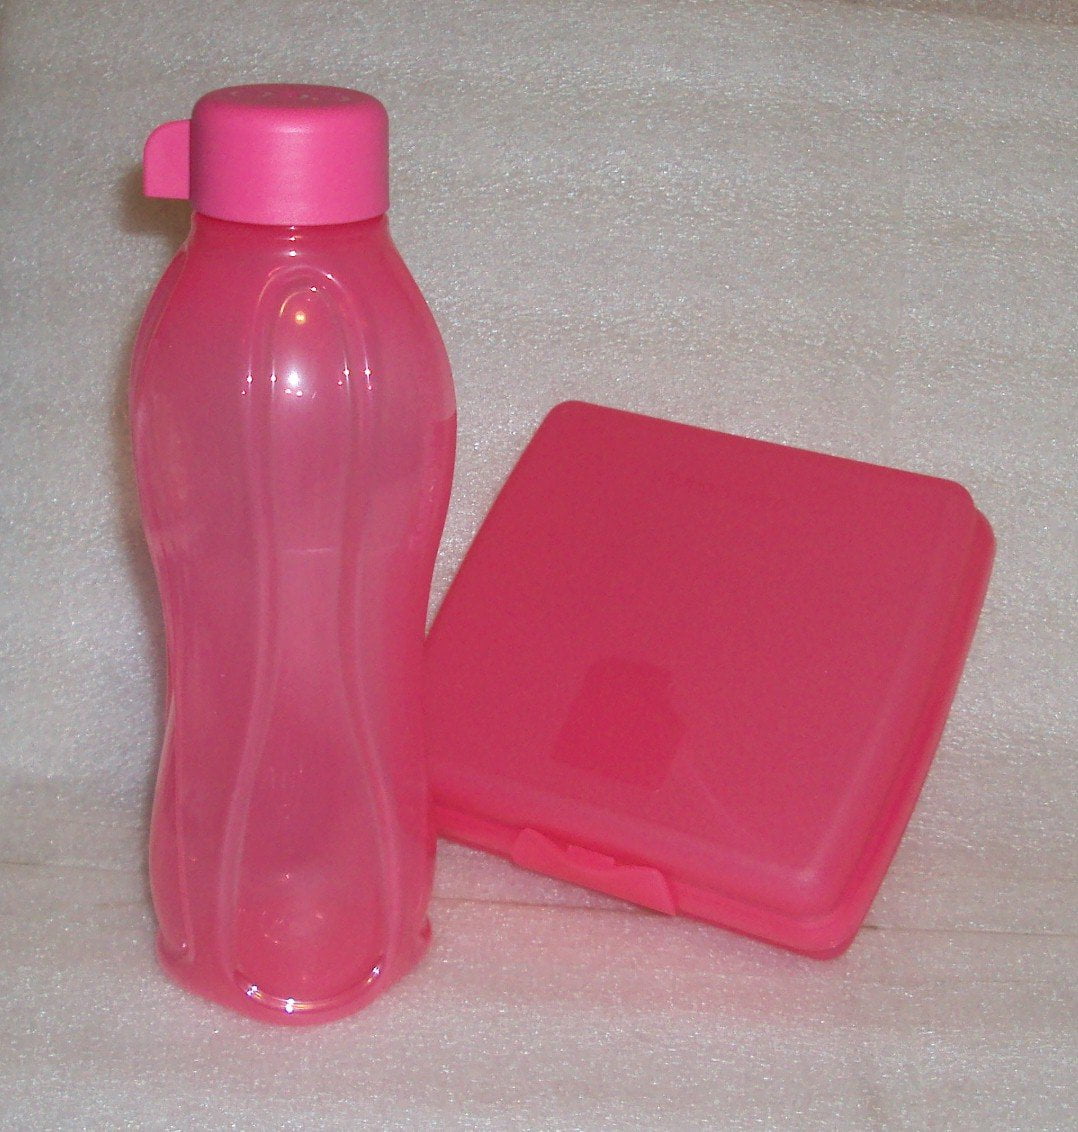 Tupperware Neon Pink Lunch Set Sandwich Keeper Ideal Snack Bowl 16oz Tumbler New 